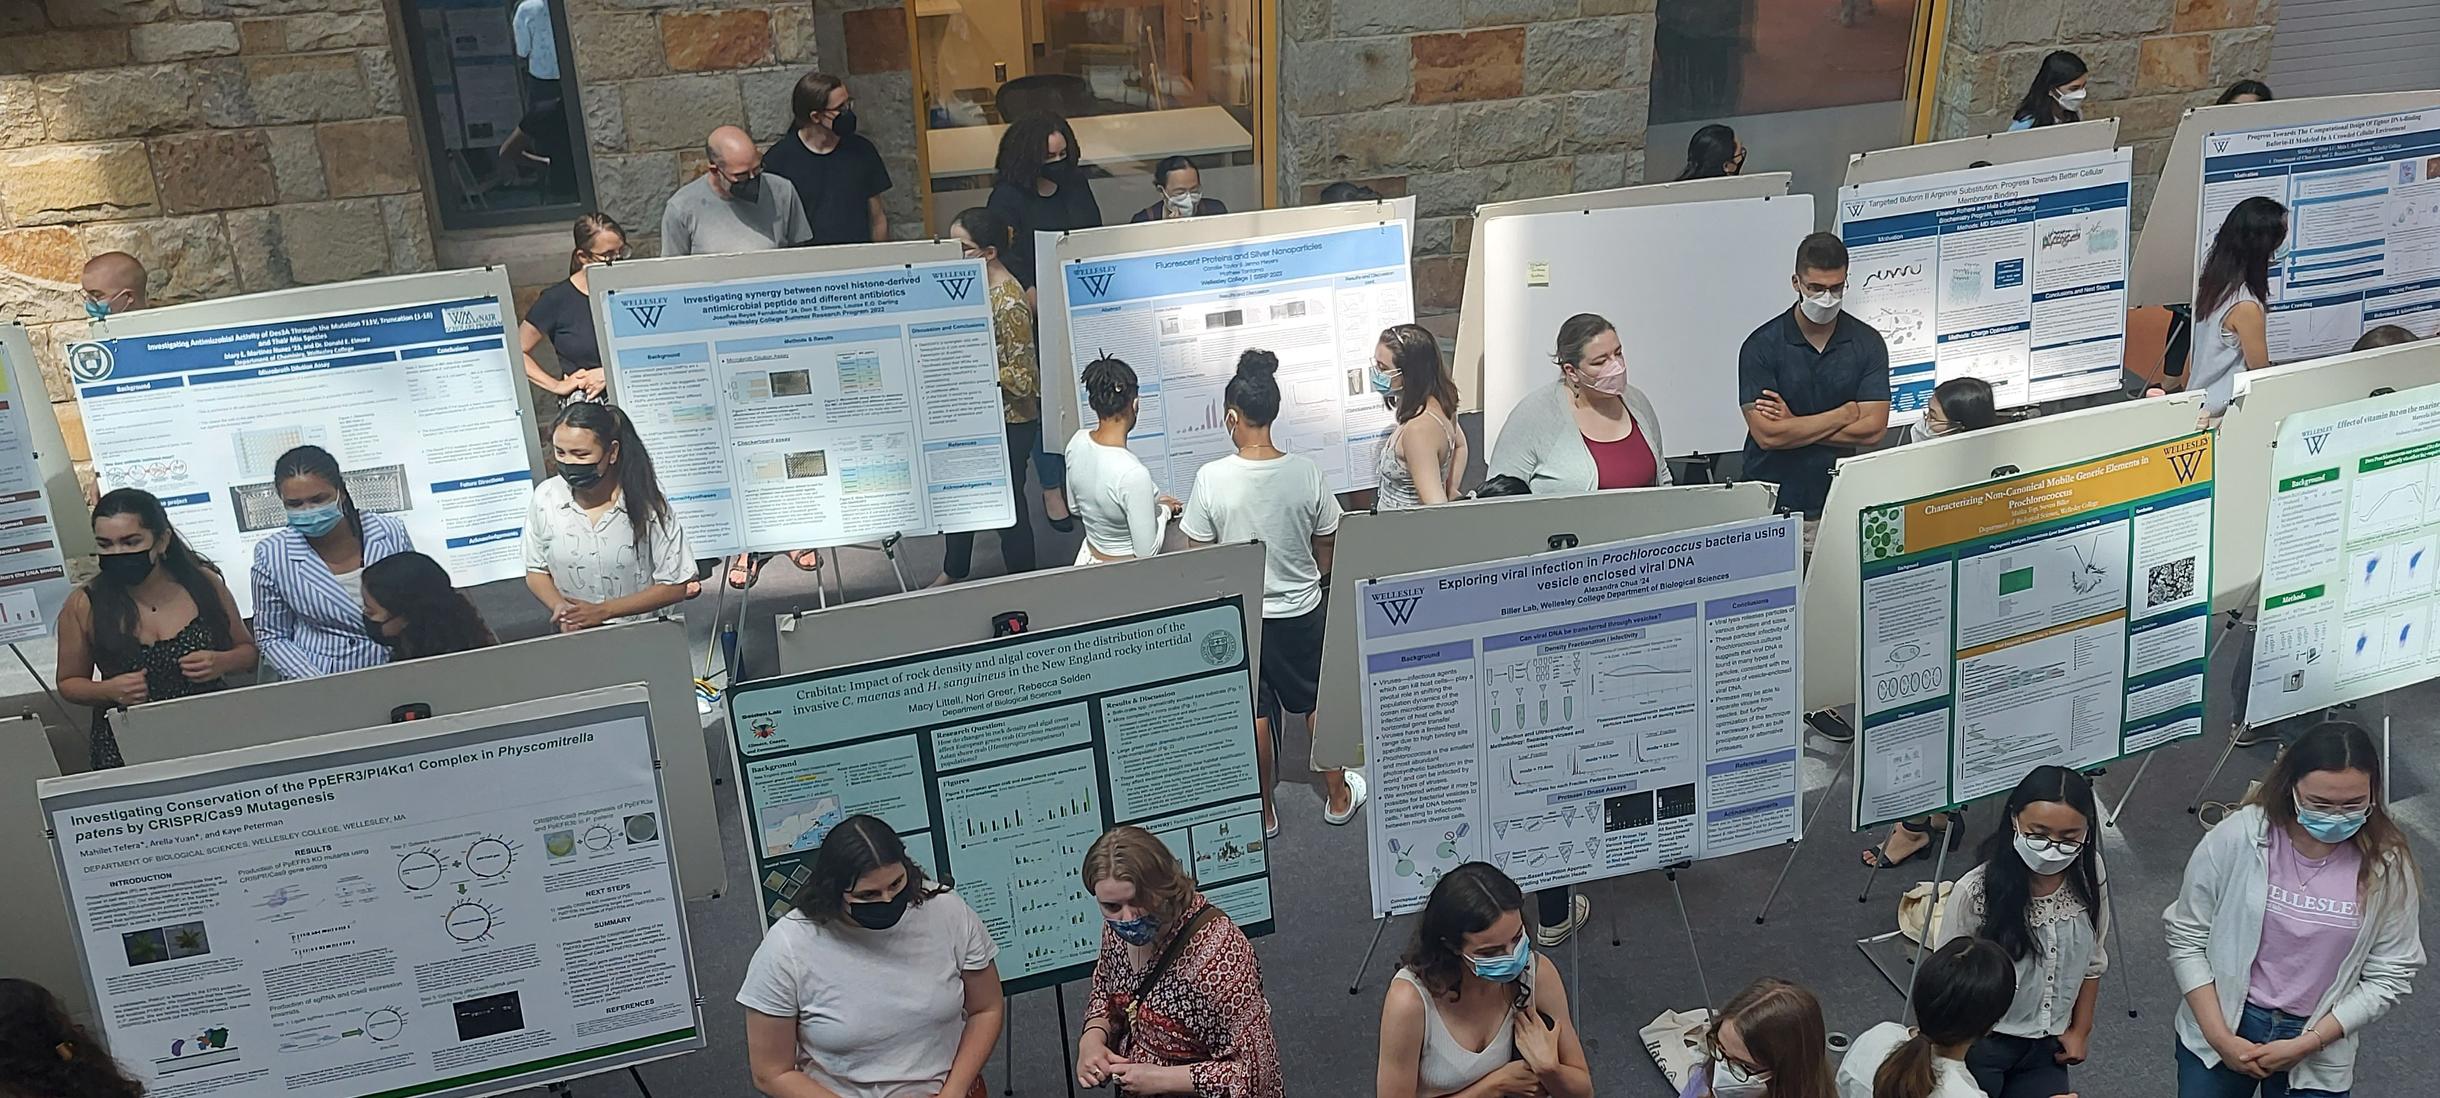 Poster presentation in the Science Center